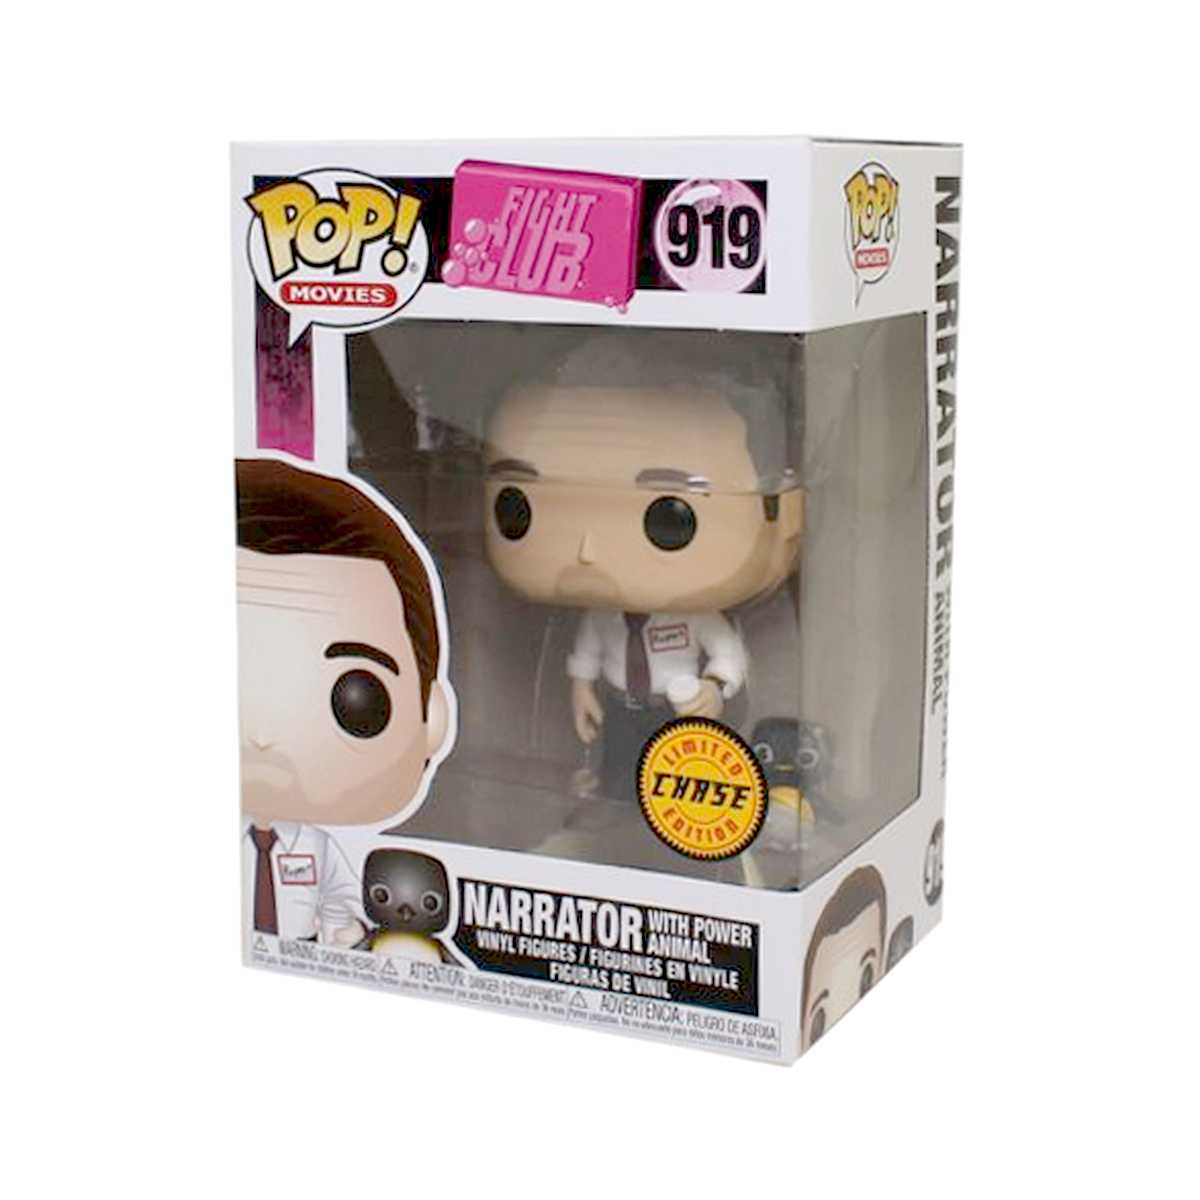 Funko Pop! Movies Fight Club Narrator with Power Animal CHASE vinyl figure número 919